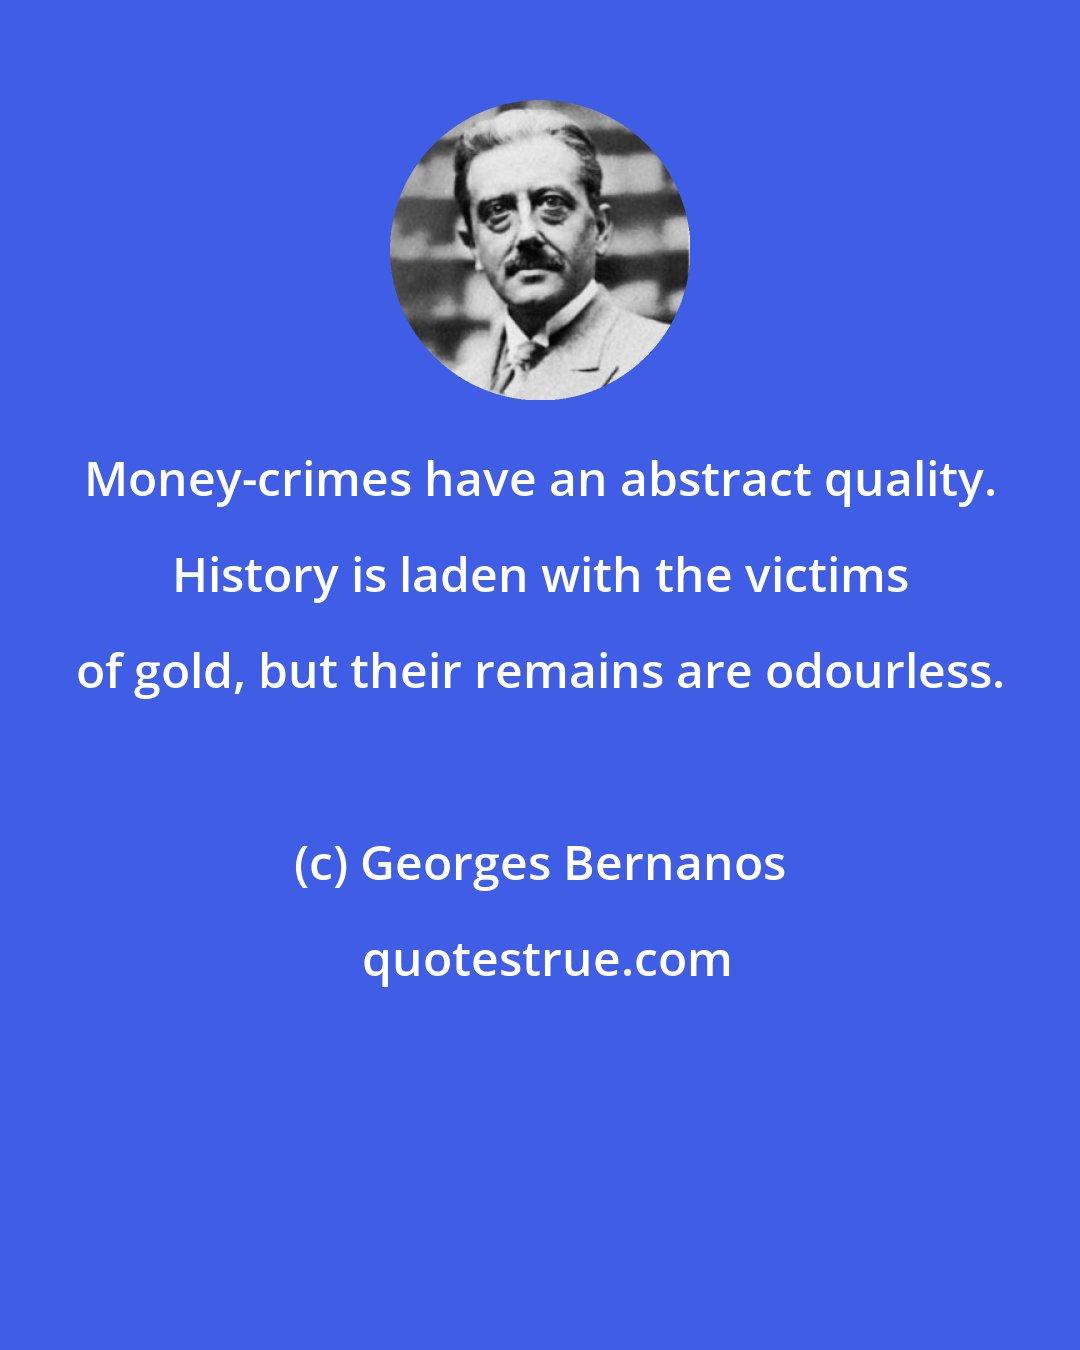 Georges Bernanos: Money-crimes have an abstract quality. History is laden with the victims of gold, but their remains are odourless.